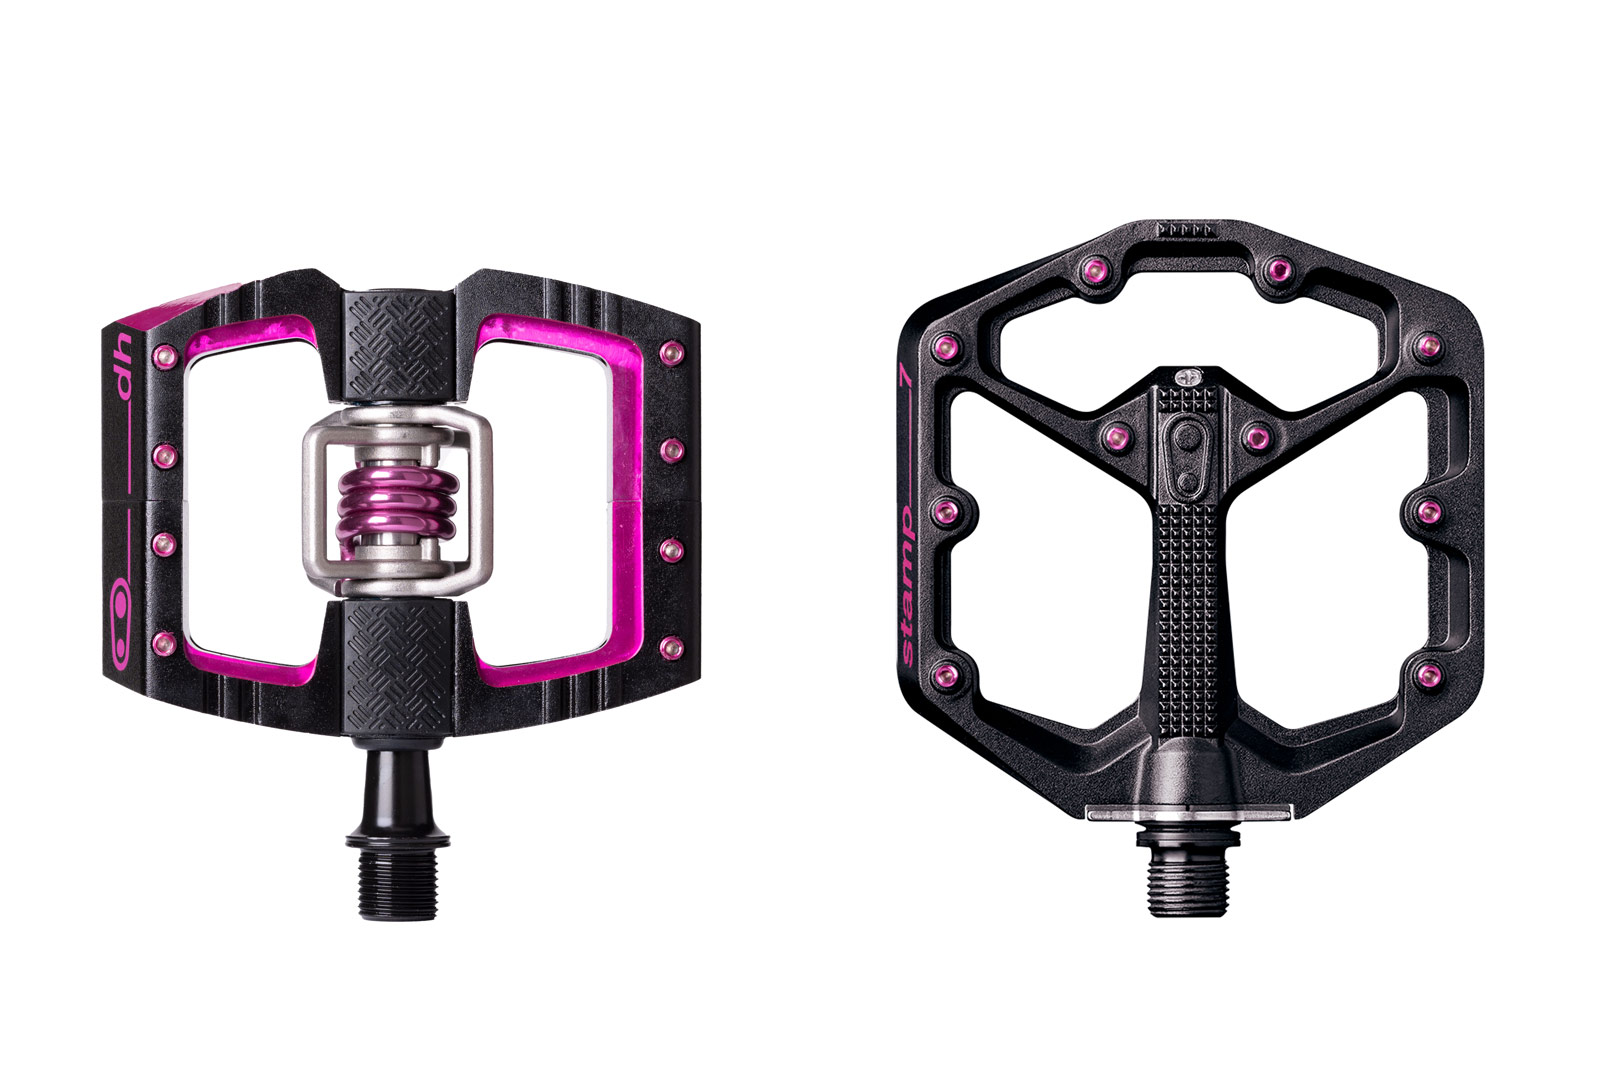 Crankbrothers x Seagrave brings Black & Pink Mallet DH and Stamp 7